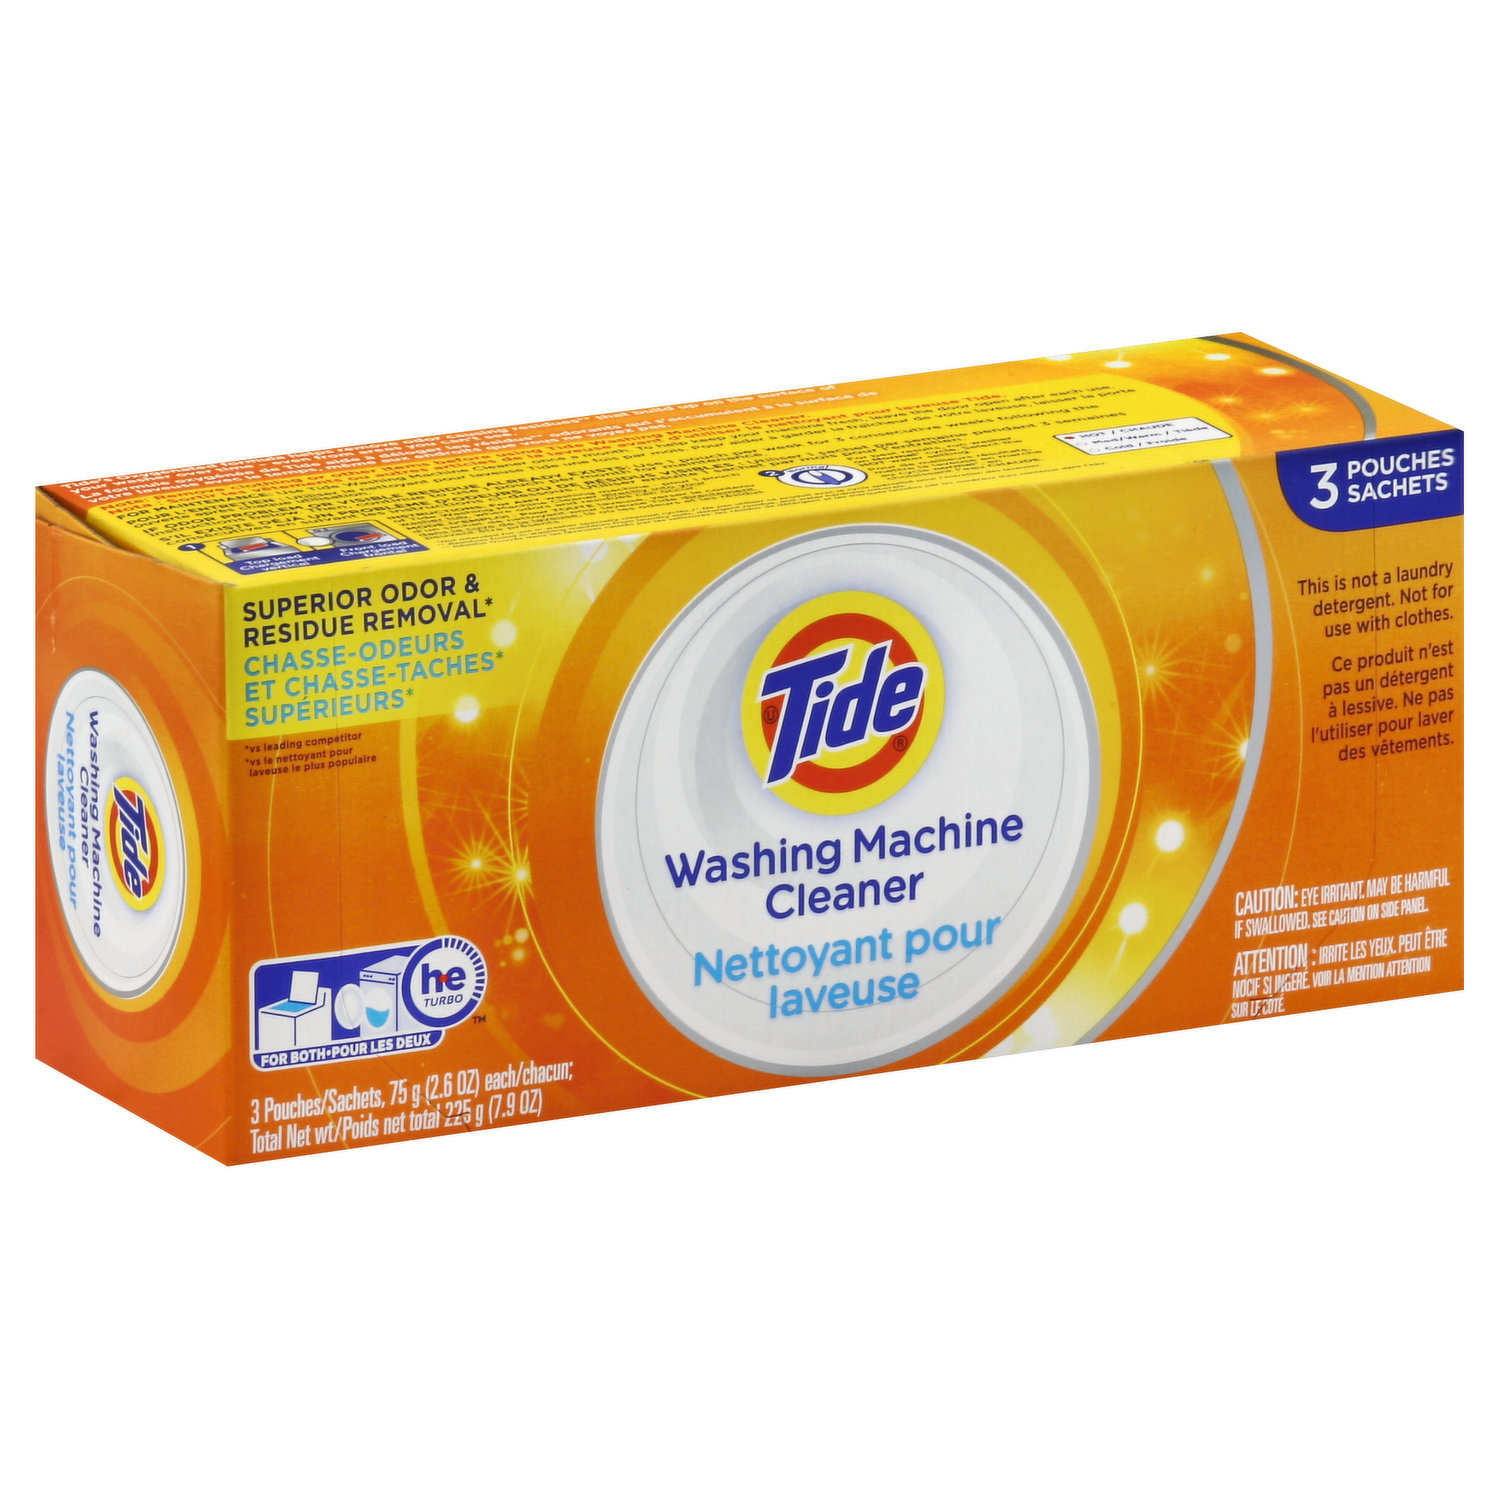 Tide Washing Machine Cleaner HE Odor Remover Box - 3 Count - Safeway